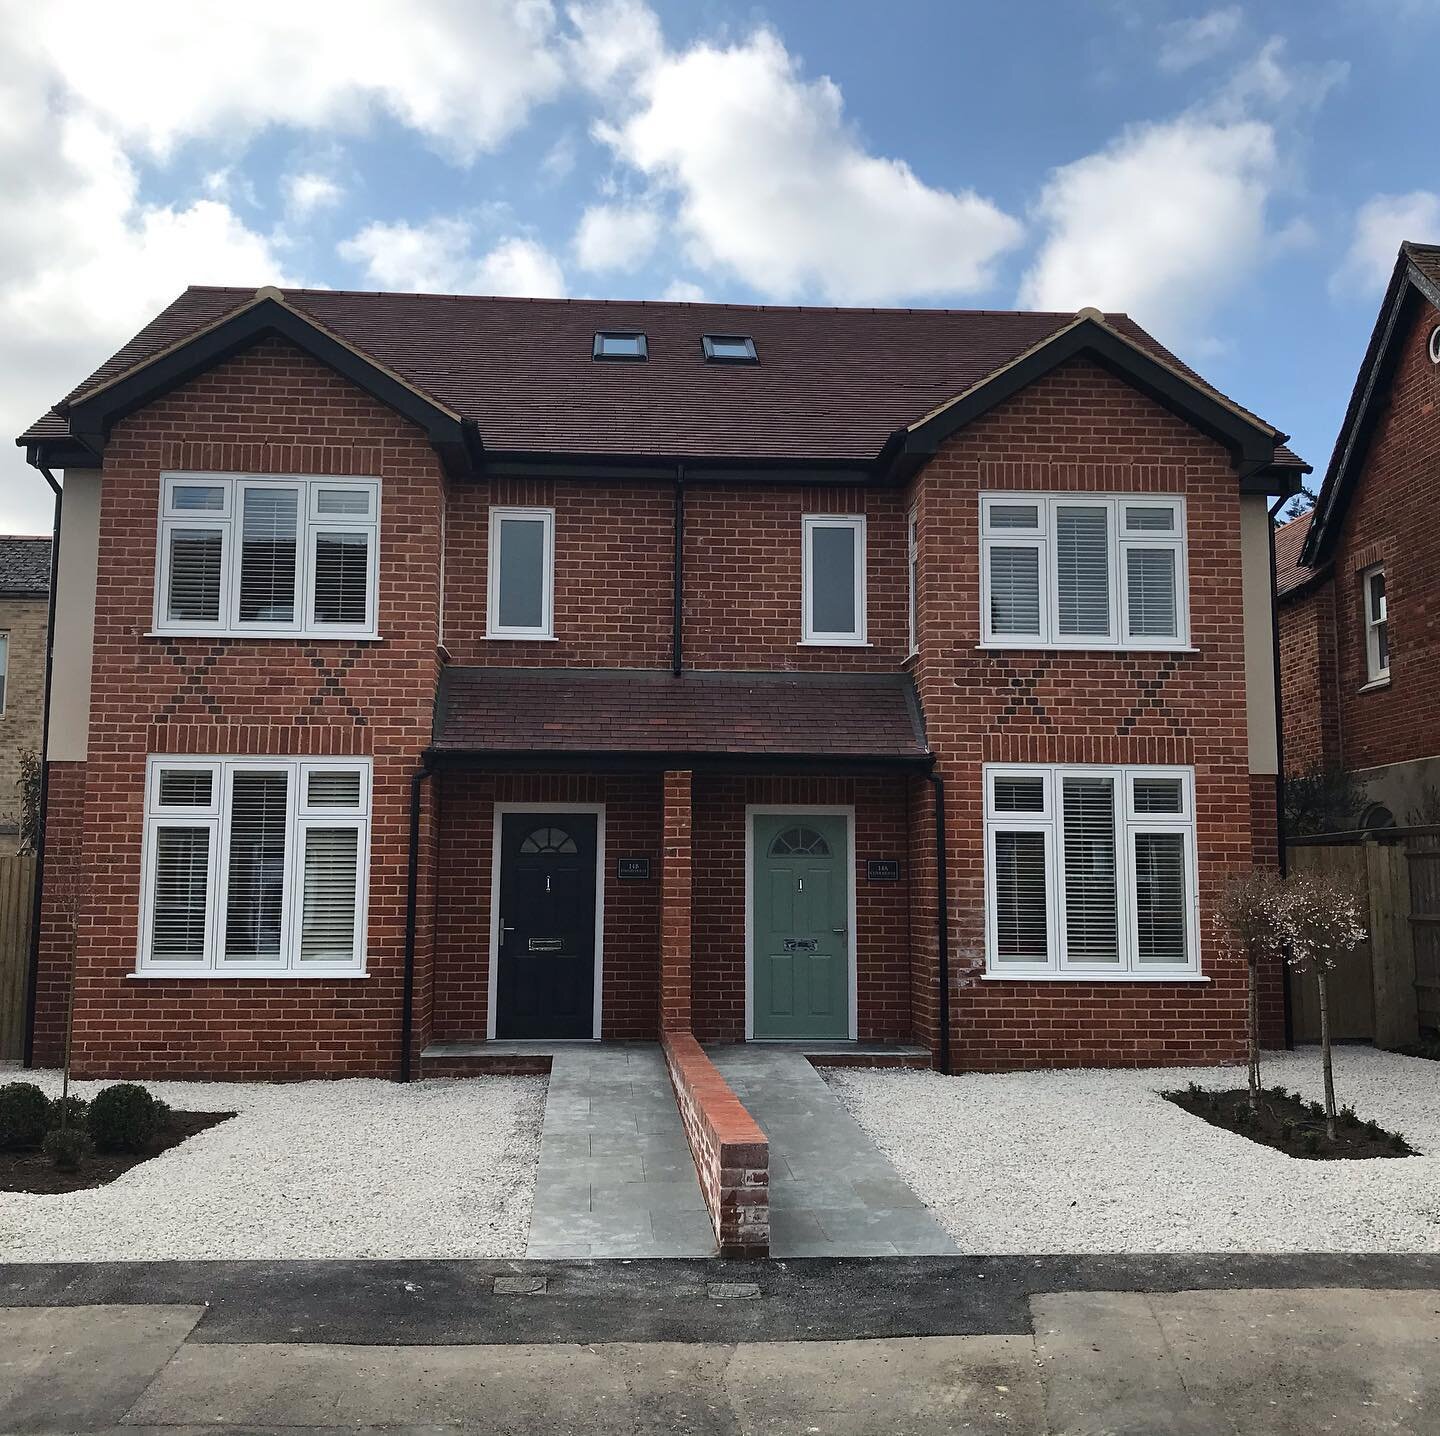 A newly completed project in North Oxford using our Handmade Heritage Imperial light Blend and Light Glazed Headers.
The client wanted to use a brick which was in keeping and would complement the surrounding area, they are very pleased with the finis